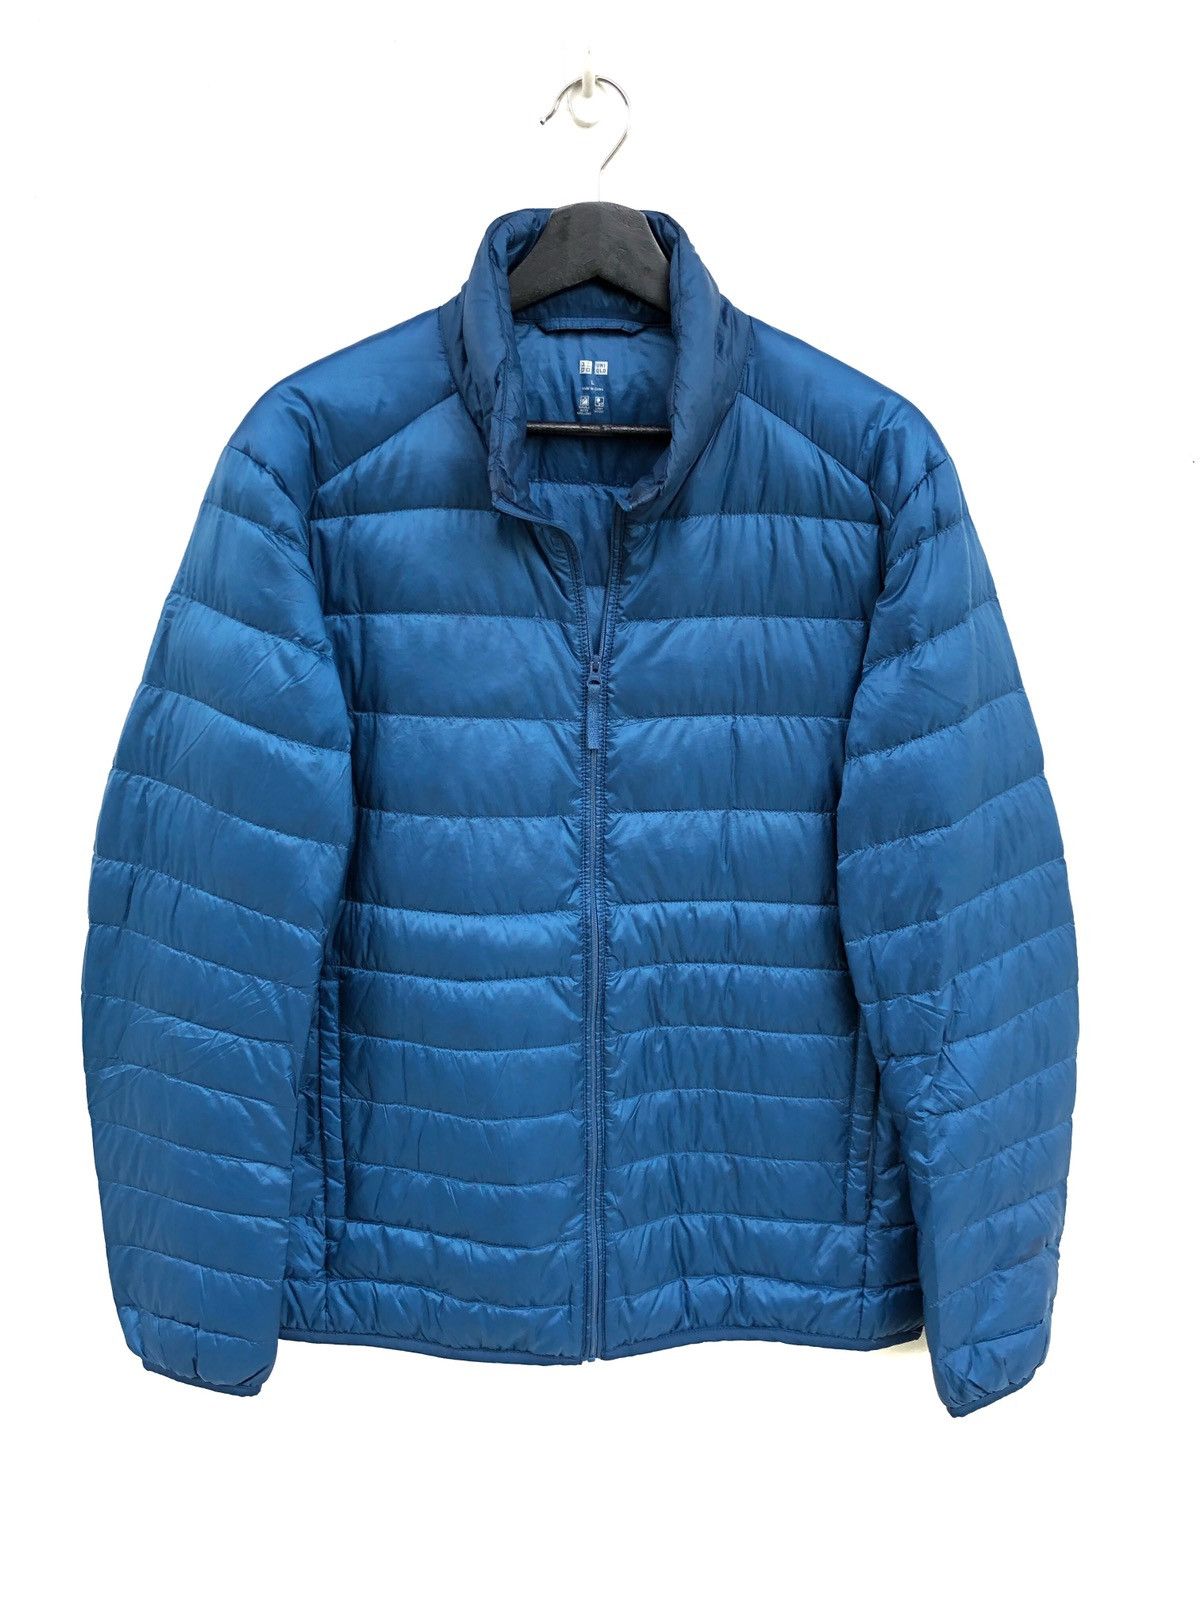 Uniqlo Puffer Quilted Jacket Size US S / EU 44-46 / 1 - 1 Preview